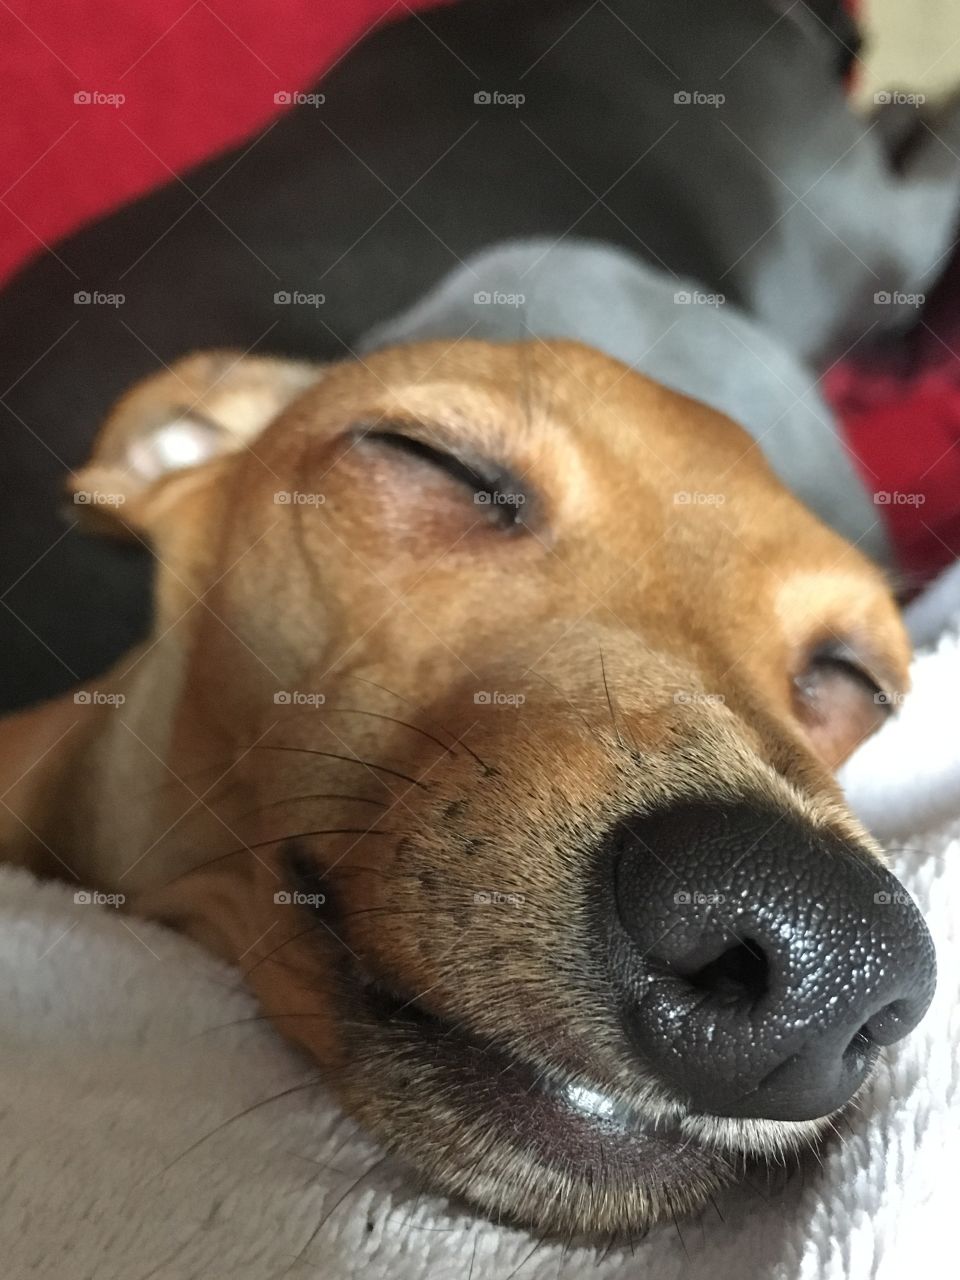 Close up view of the face of Amber the Italian greyhound puppy asleep on the sofa 